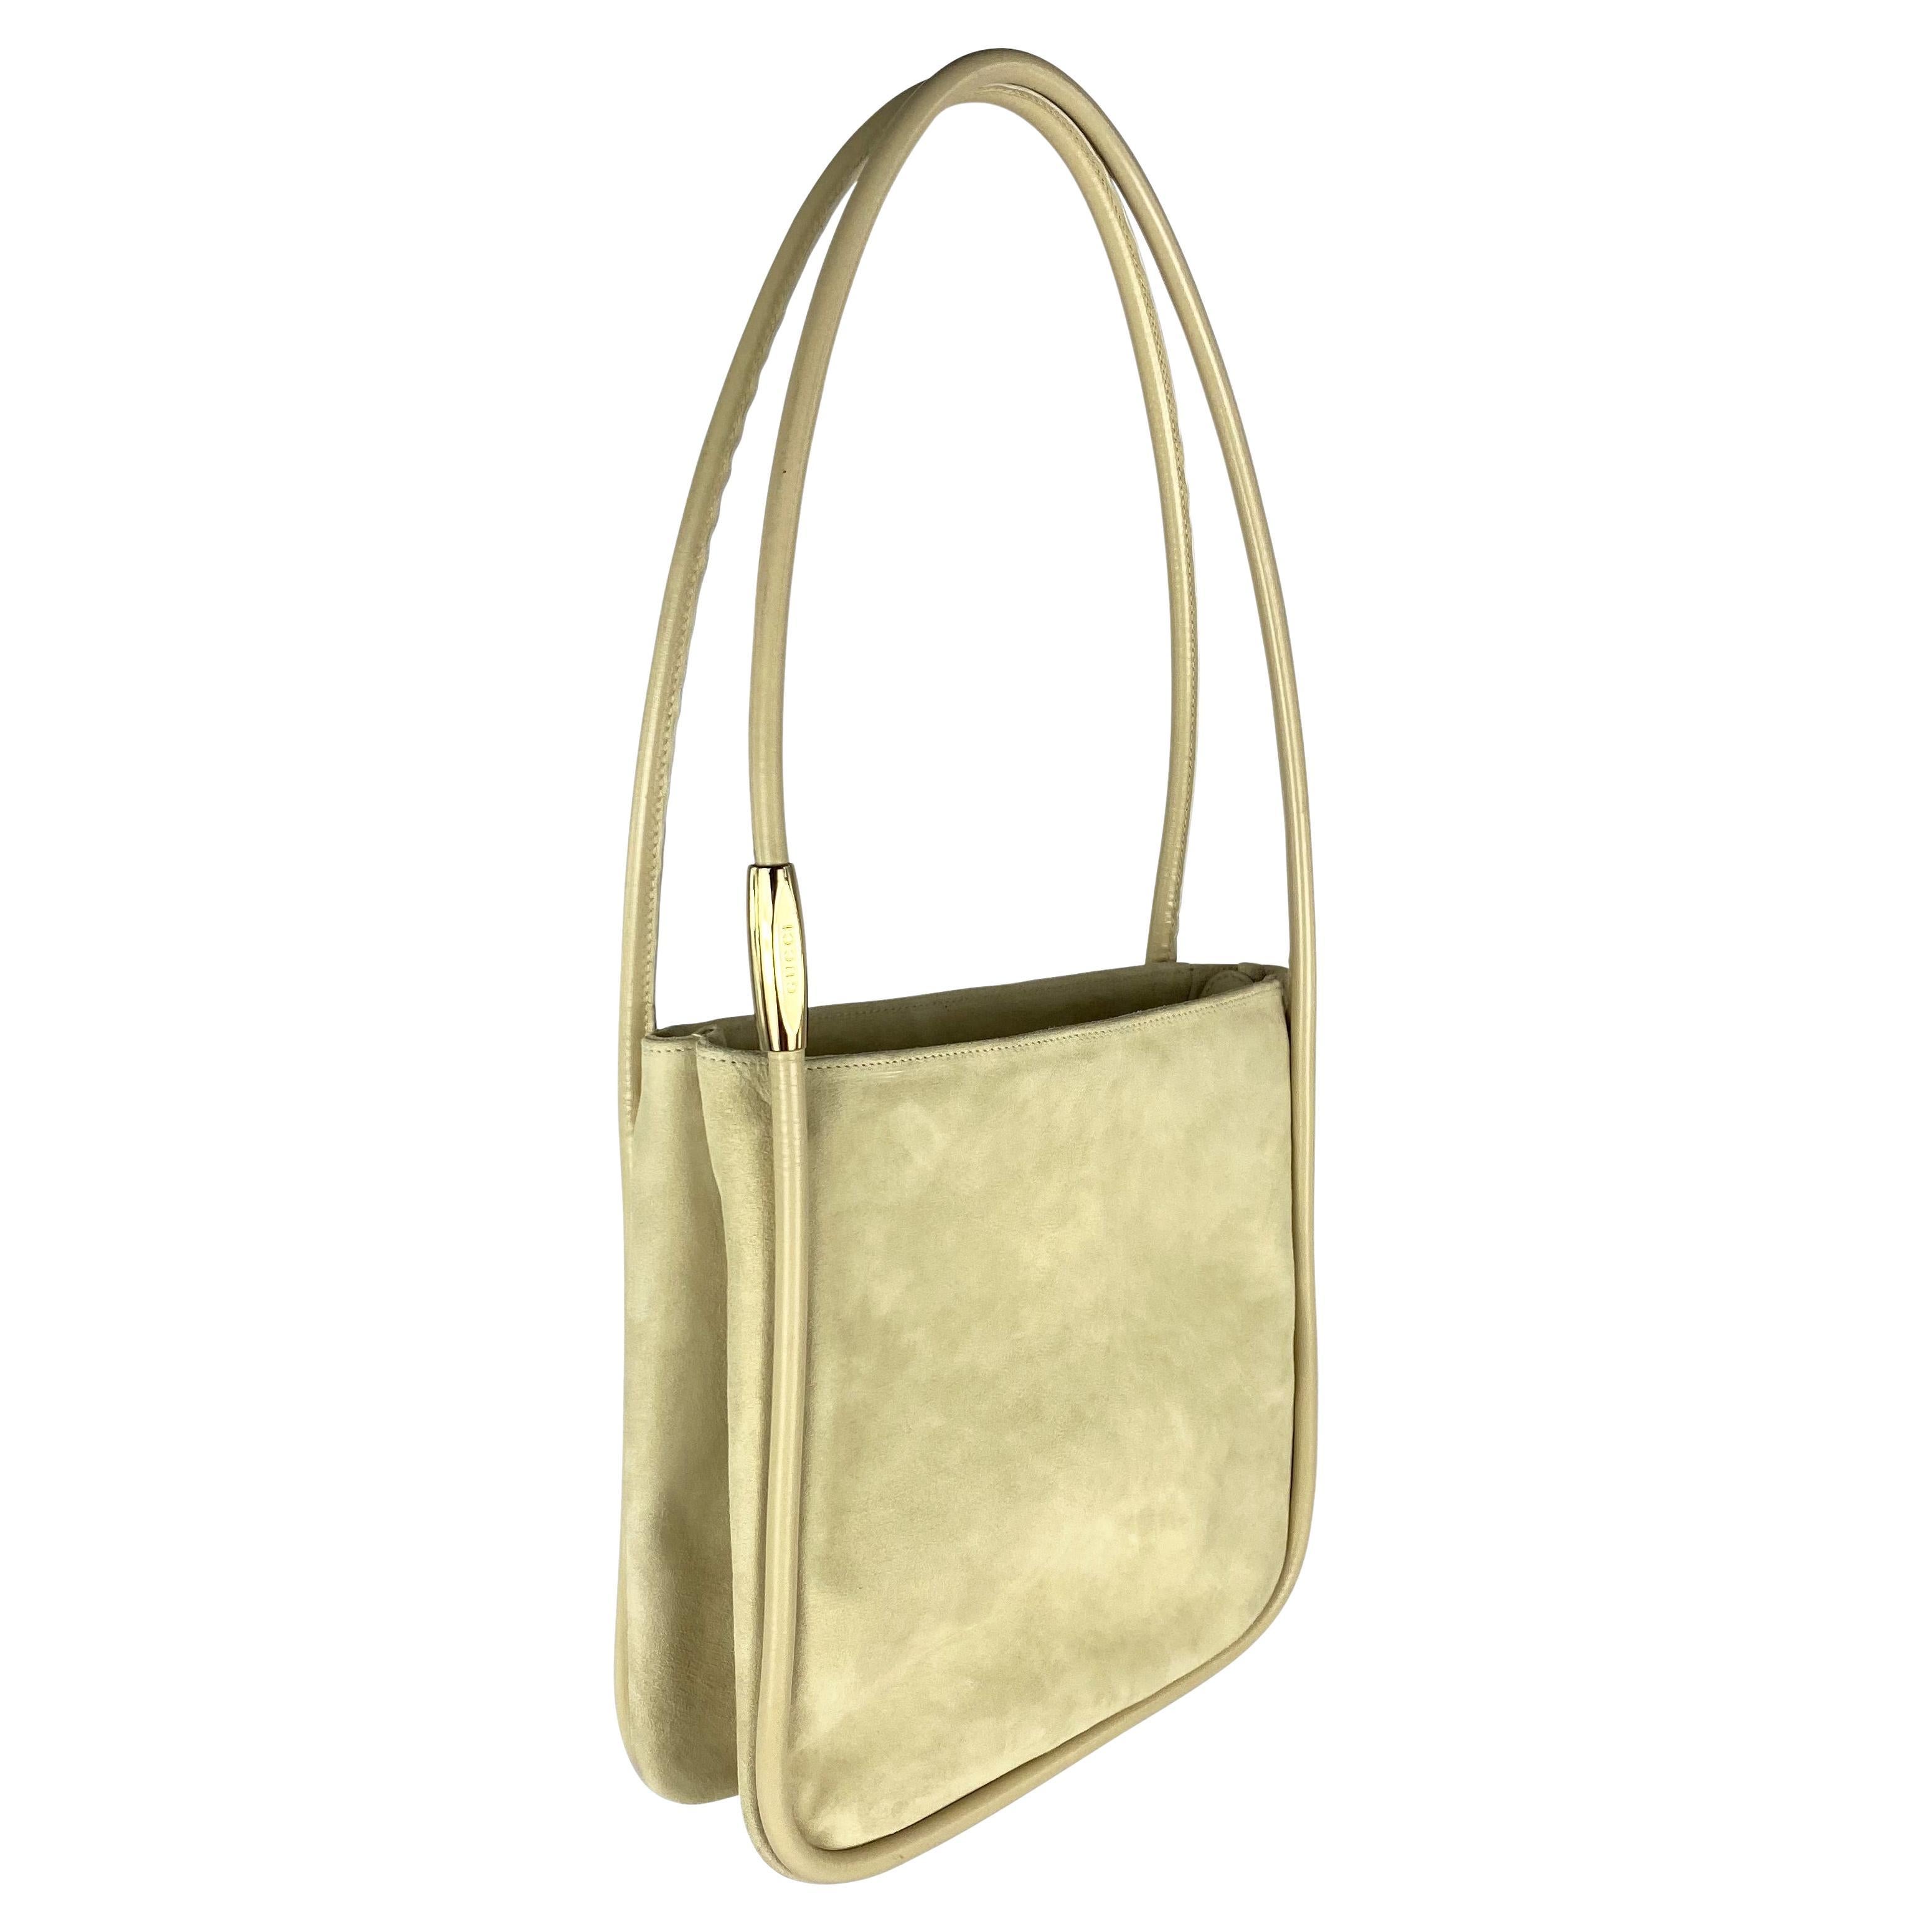 Presenting a fabulous light beige suede Gucci bag, designed by Tom Ford. From the 1996 collection, this suede bag features leather piping and handles, a gold-tone accent on the strap, and is made complete with the original tags. Add this